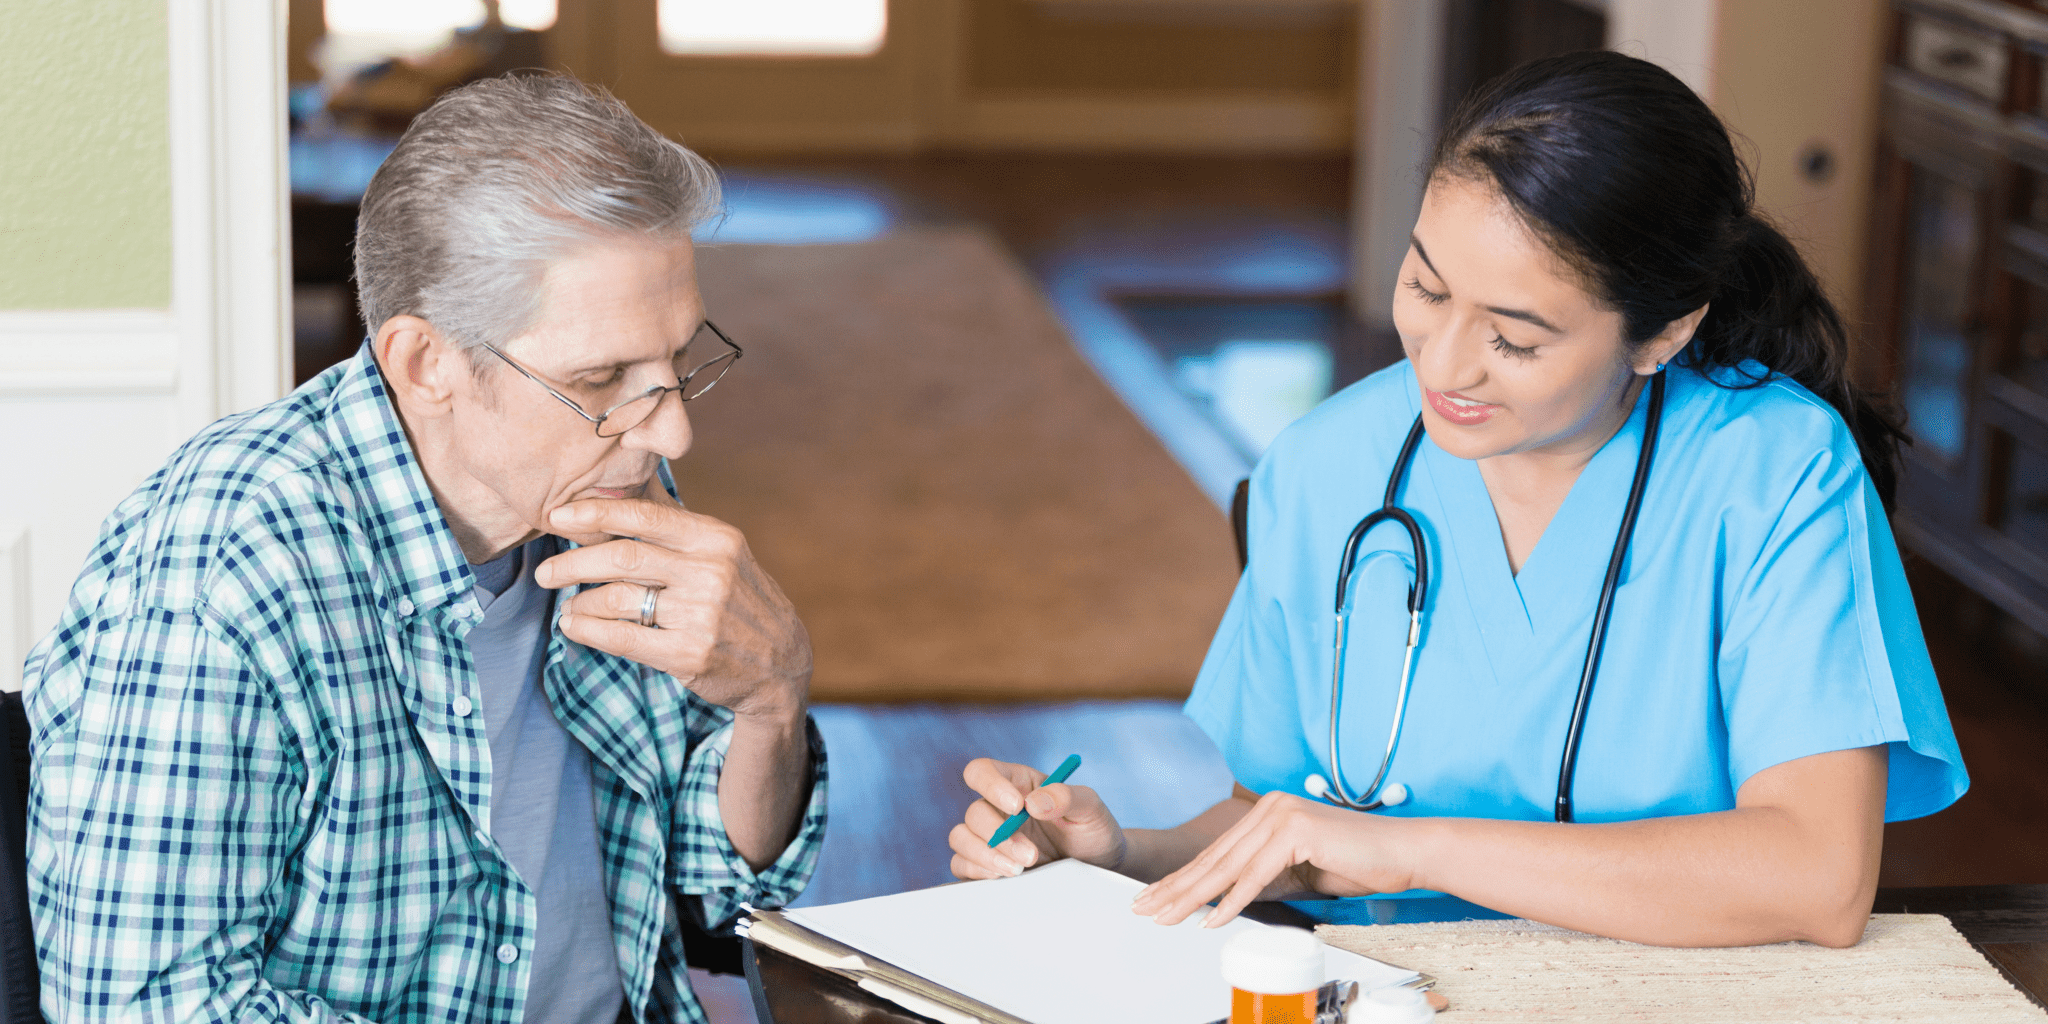 a home healthcare worker wearing scrubs and a stethoscope, while talking to an elderly man about his medication.